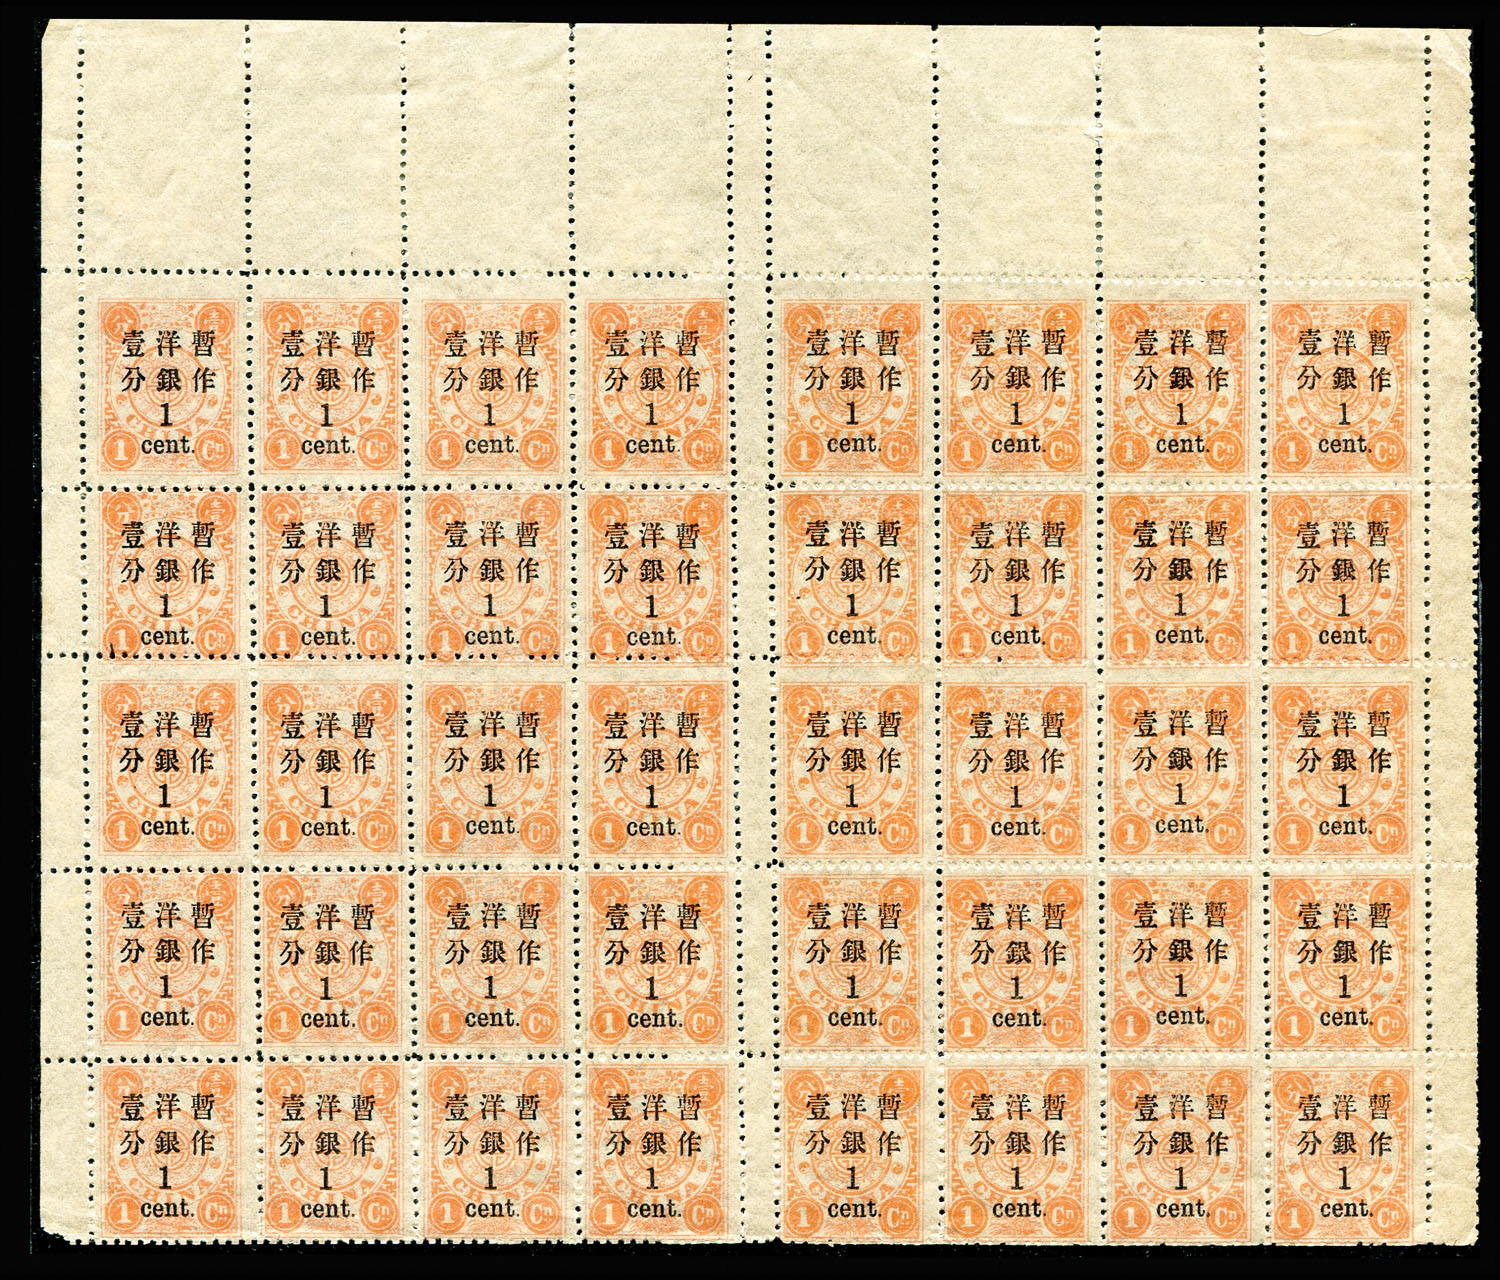 Lot 303 - GERMAN STATES Thurn & Taxis  -  Cherrystone Auctions Rare Stamps & Postal History of the World